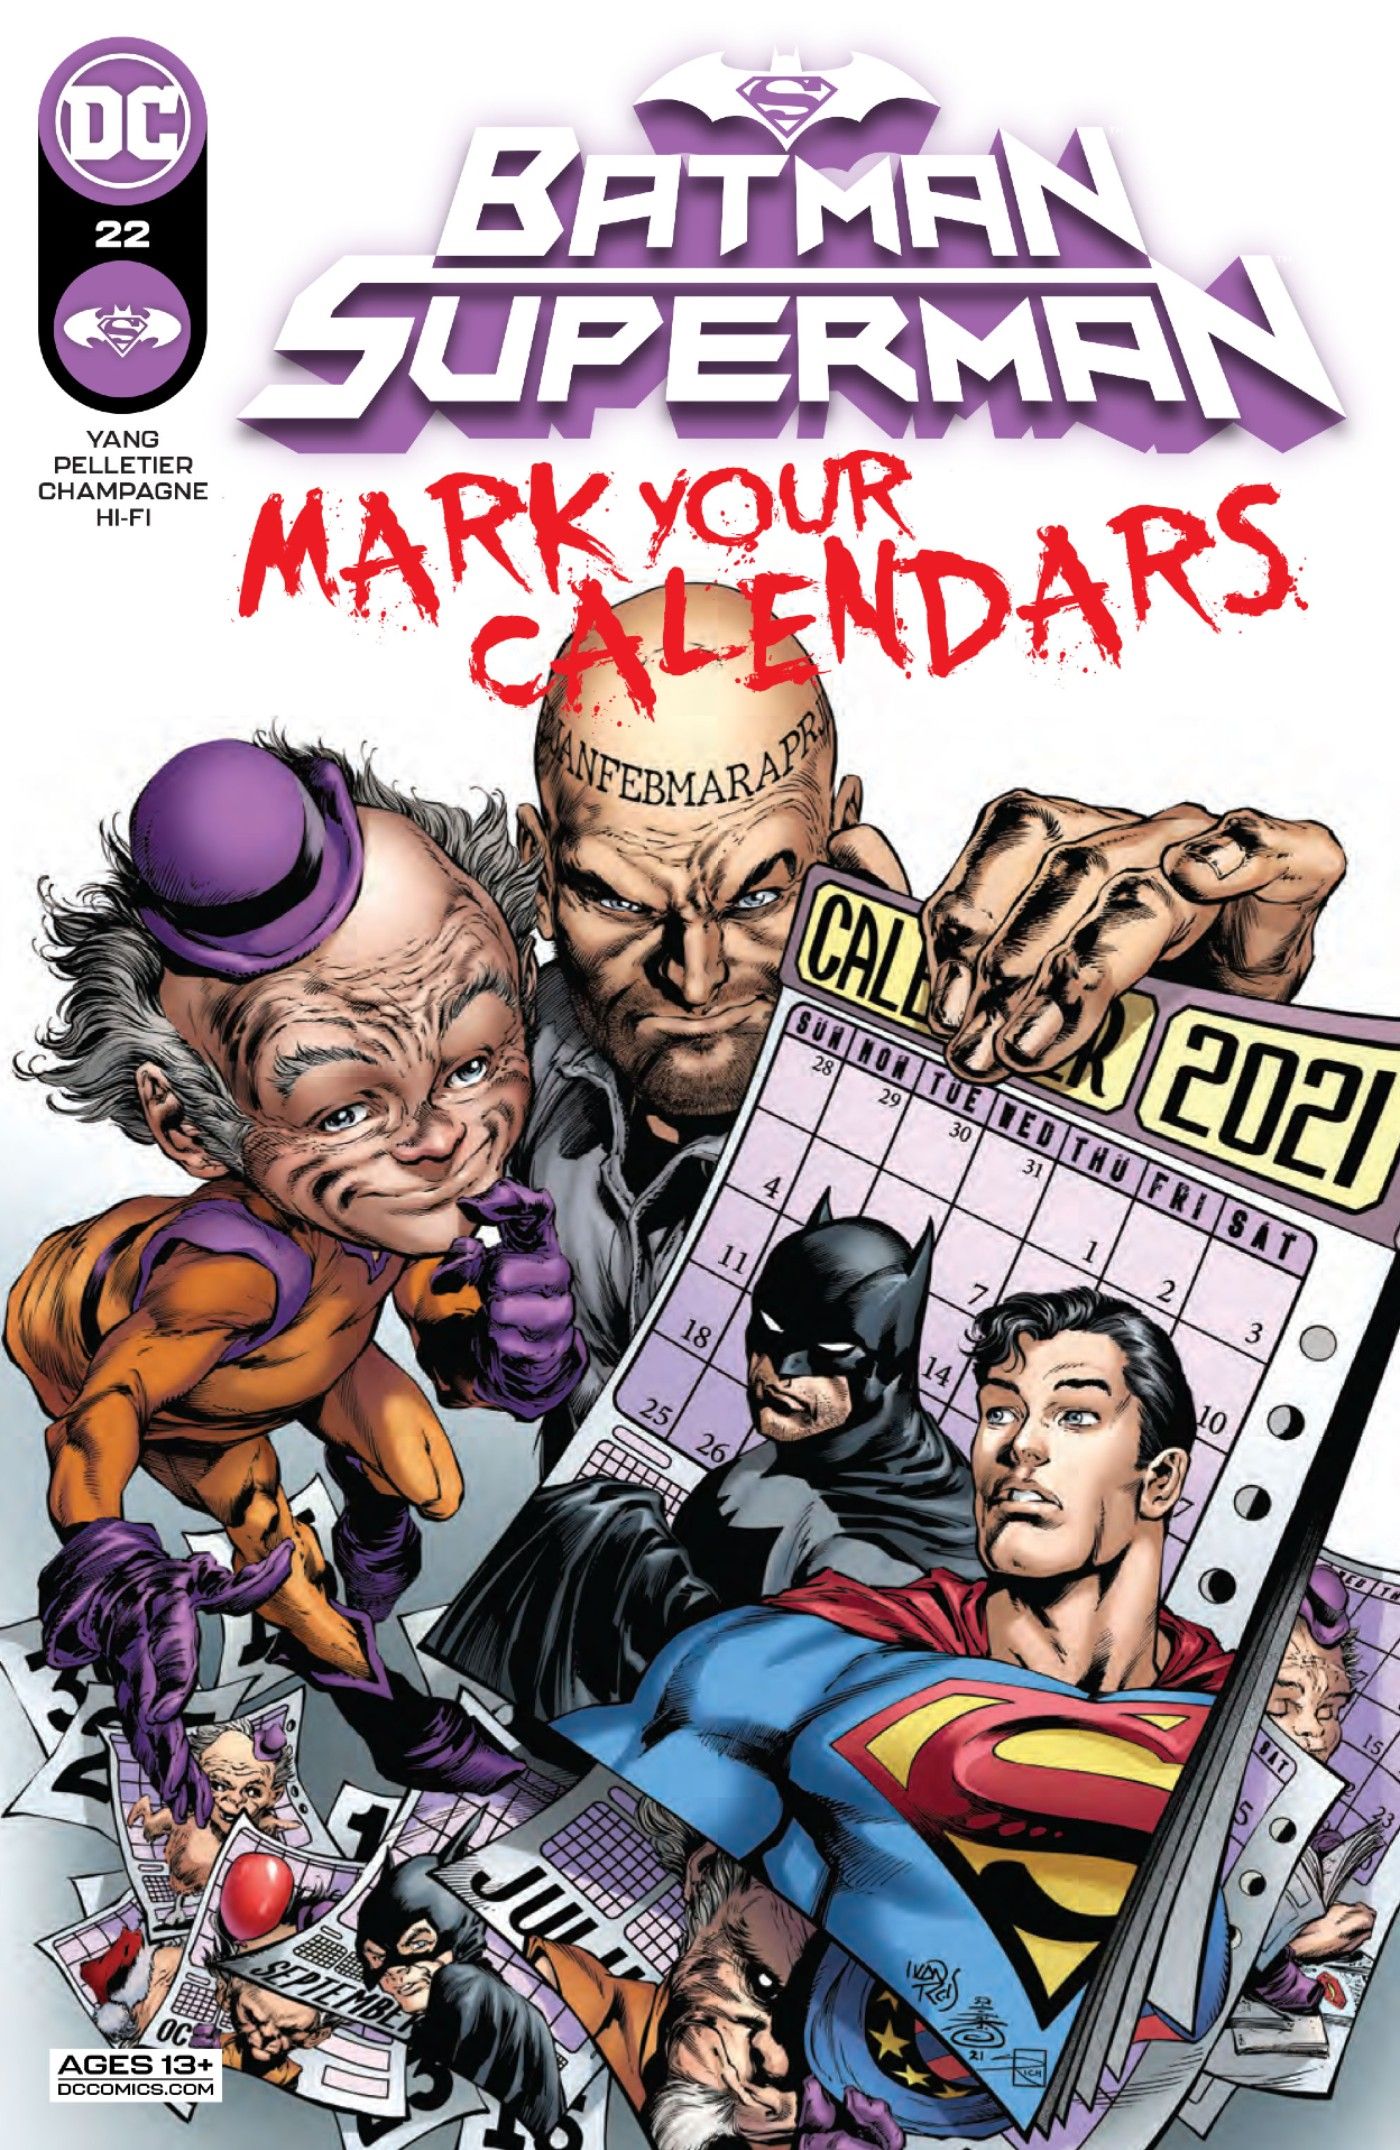 DC Reveals Why Calendar Man is Obsessed With Dates